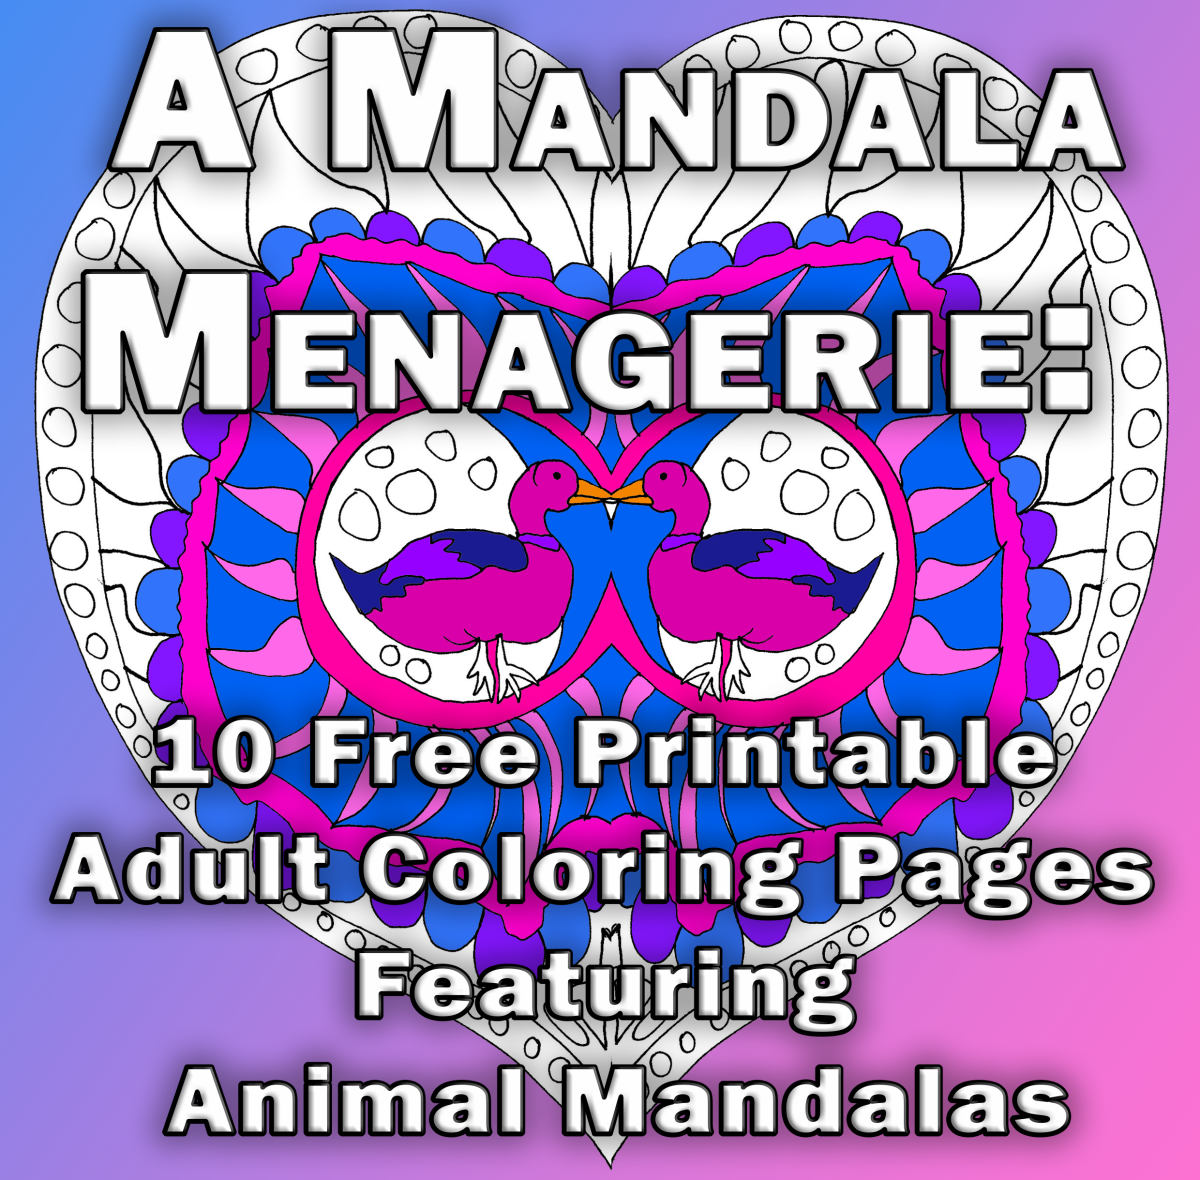 10 Free Printable Adult Coloring Pages Featuring Animals